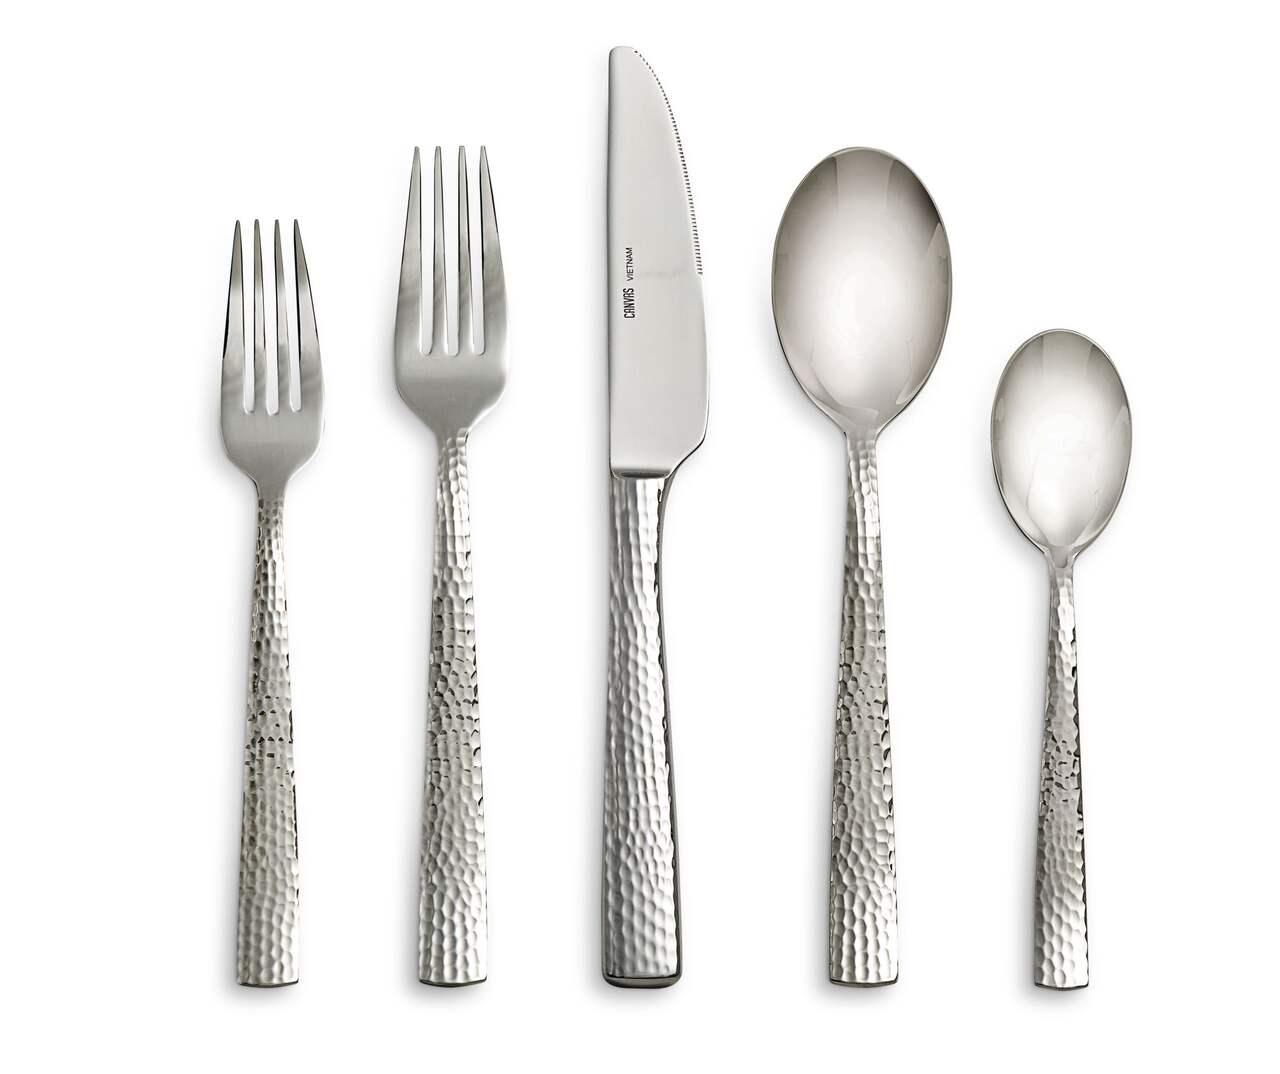 https://media-www.canadiantire.ca/product/living/kitchen/dining-and-entertaining/1424887/canvas-ellice-flatware-set-20-piece-68badb62-30c8-4e41-9f46-5e274aa1169f-jpgrendition.jpg?imdensity=1&imwidth=640&impolicy=mZoom